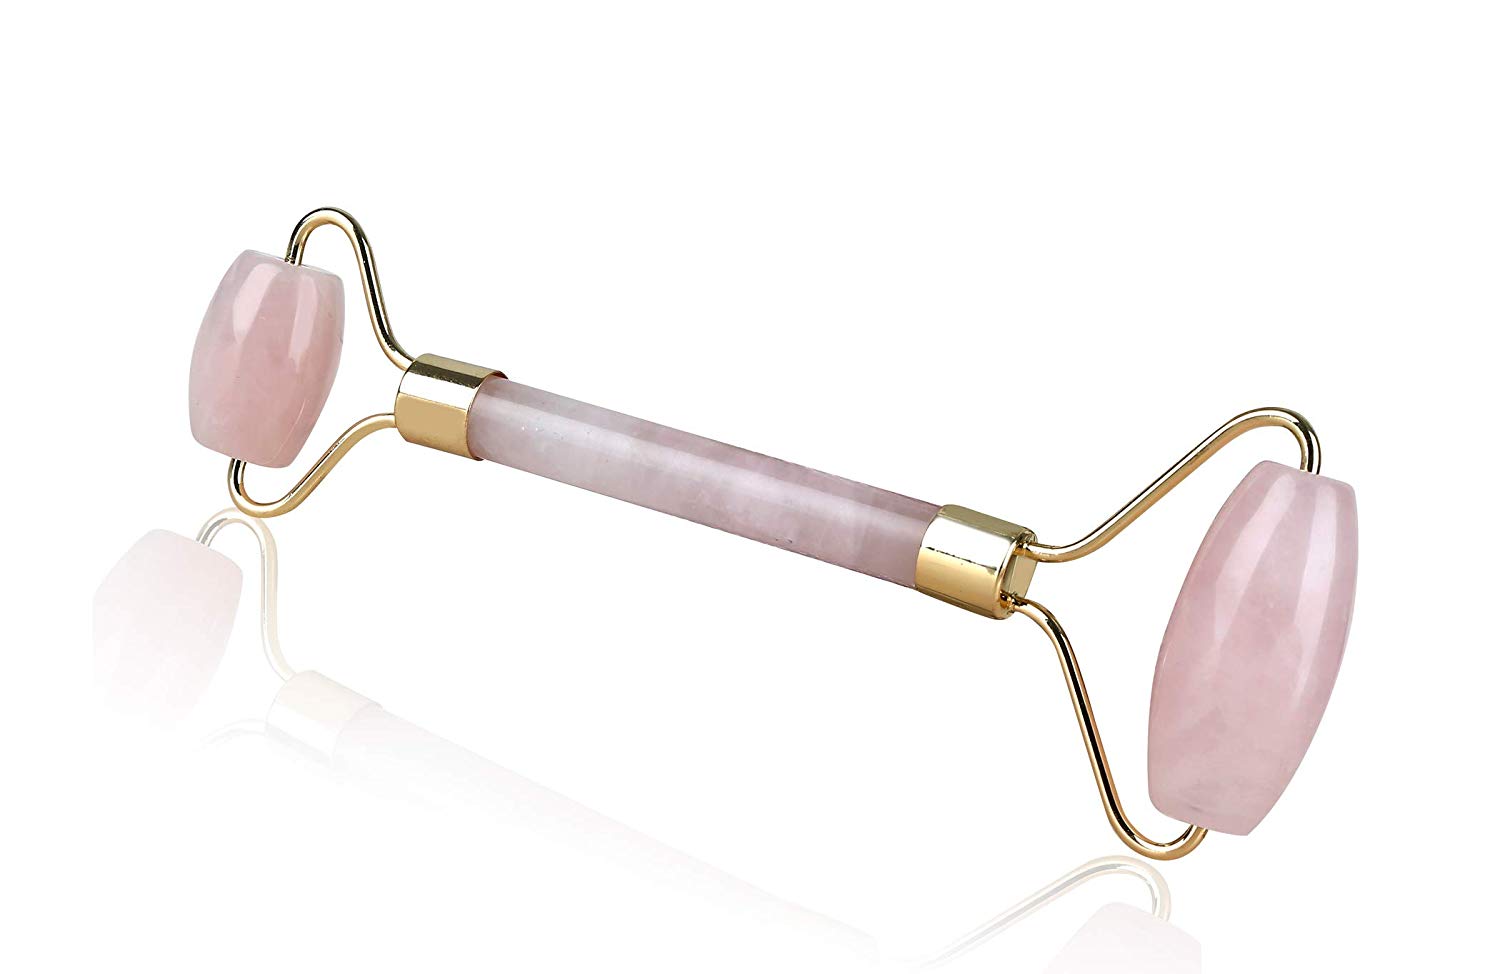 Lifestyle blogger Lexi of Glitter, Inc. shares her favorite weekly finds from around the web, including this affordable Rose Quartz Jade Roller from Amazon | glitterinc.com | @glitterinc